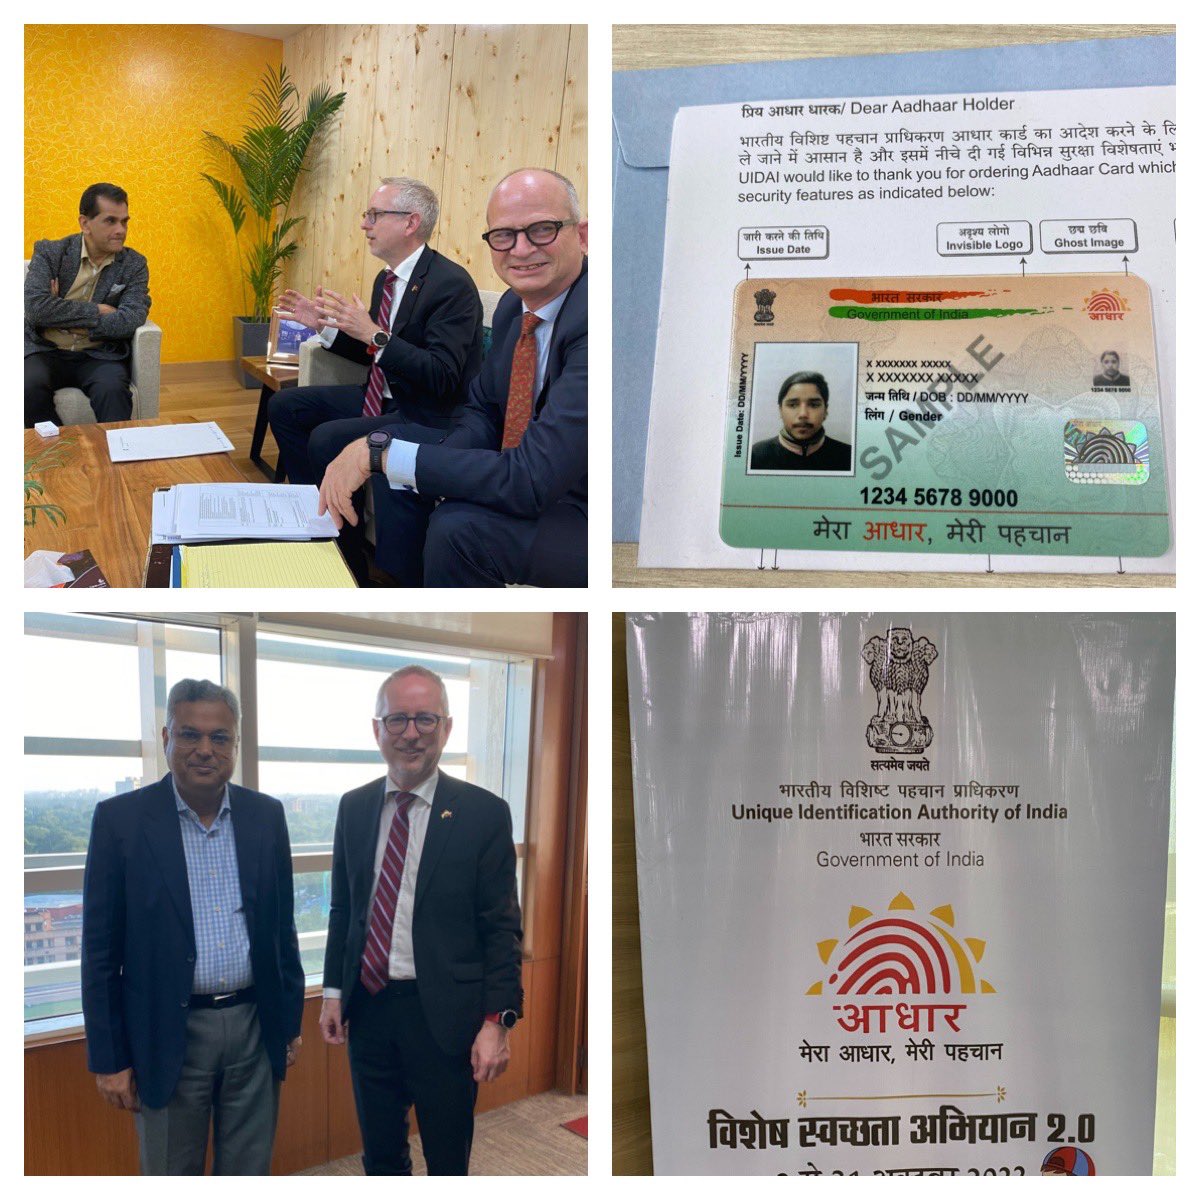 Aadhaar is an amazing digital ID for all Indians - a true #digitalpublicgood Developed by @UIDAI - open source and may be shared and adapted. A huge global development opportunity, 1 billion people lack ID. @amitabhk87 is making it part of Indias G20 leadership @DPGAlliance